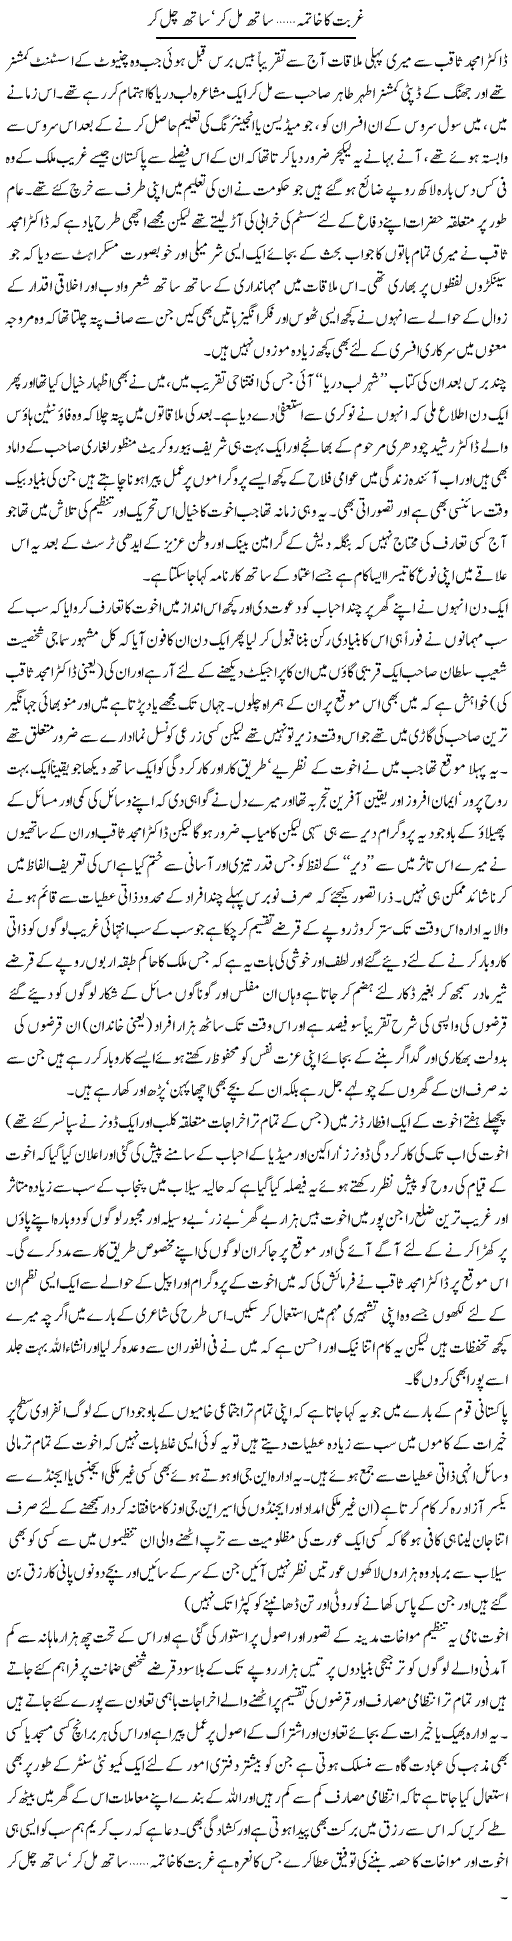 Ending Poverty Express Column Amjad Islam 22 August 2010